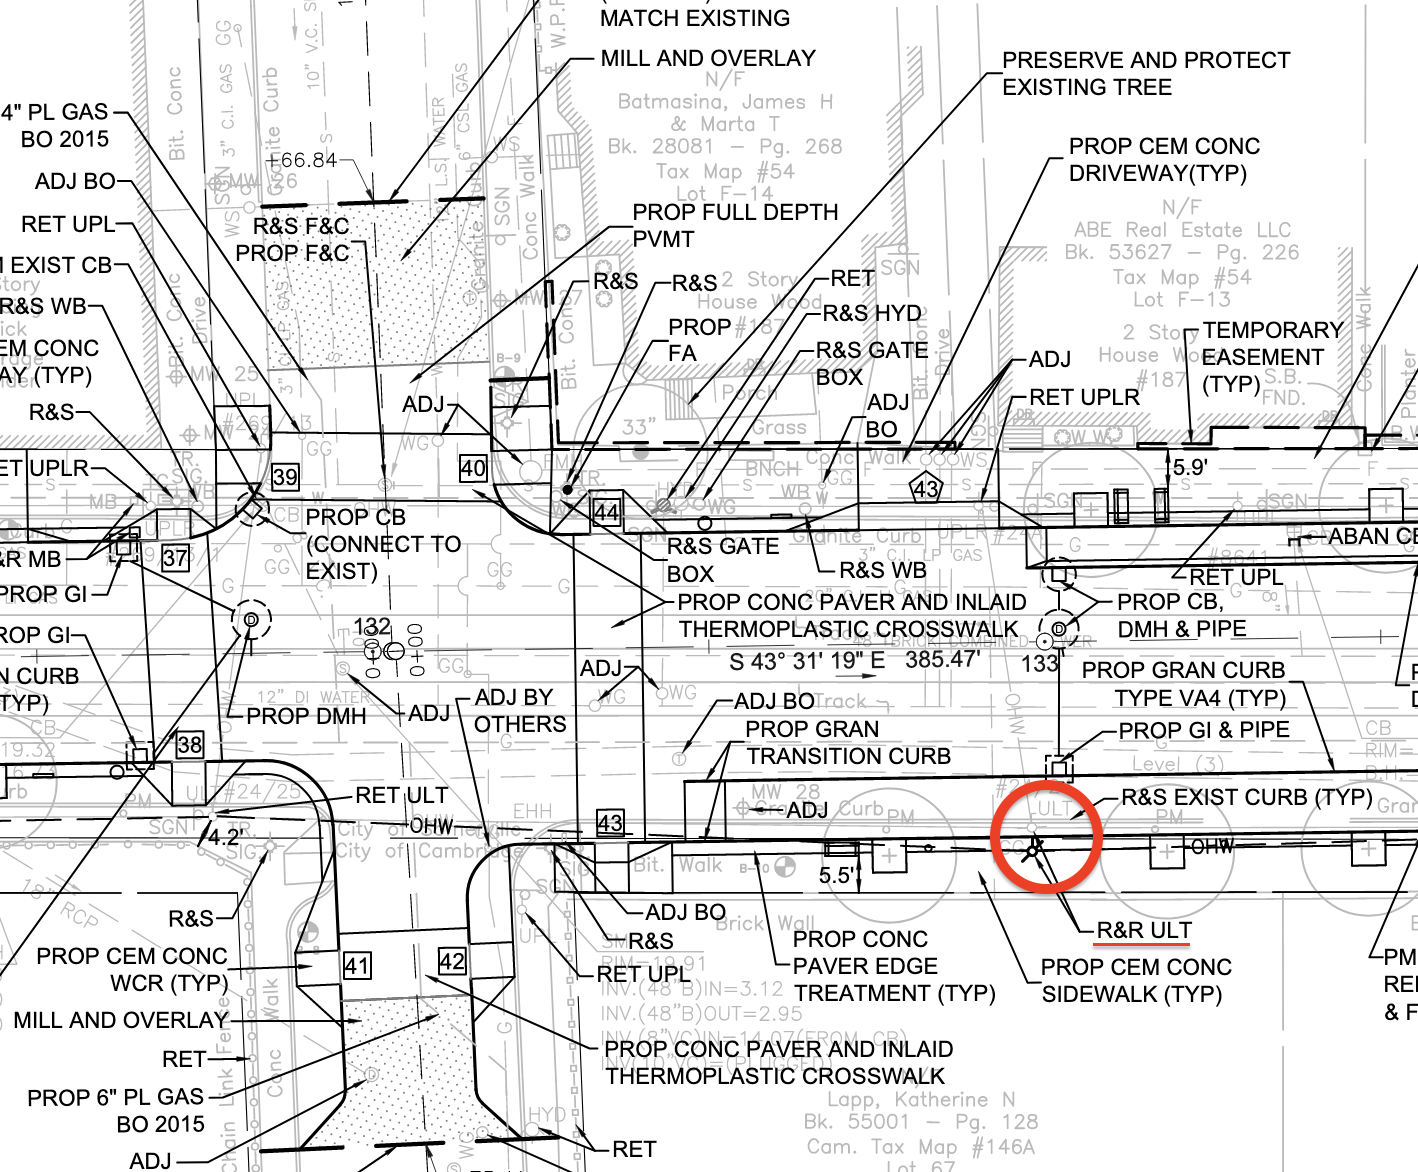 A detail from construction plans posted on the City of Somerville website highlights the former location (in gray) and planned location (in black) for an Eversource utility pole that blocked a newly-built bike lane on Beacon Street earlier this summer ("R&R ULT" is an abbreviation for "relocate and reset utility pole").